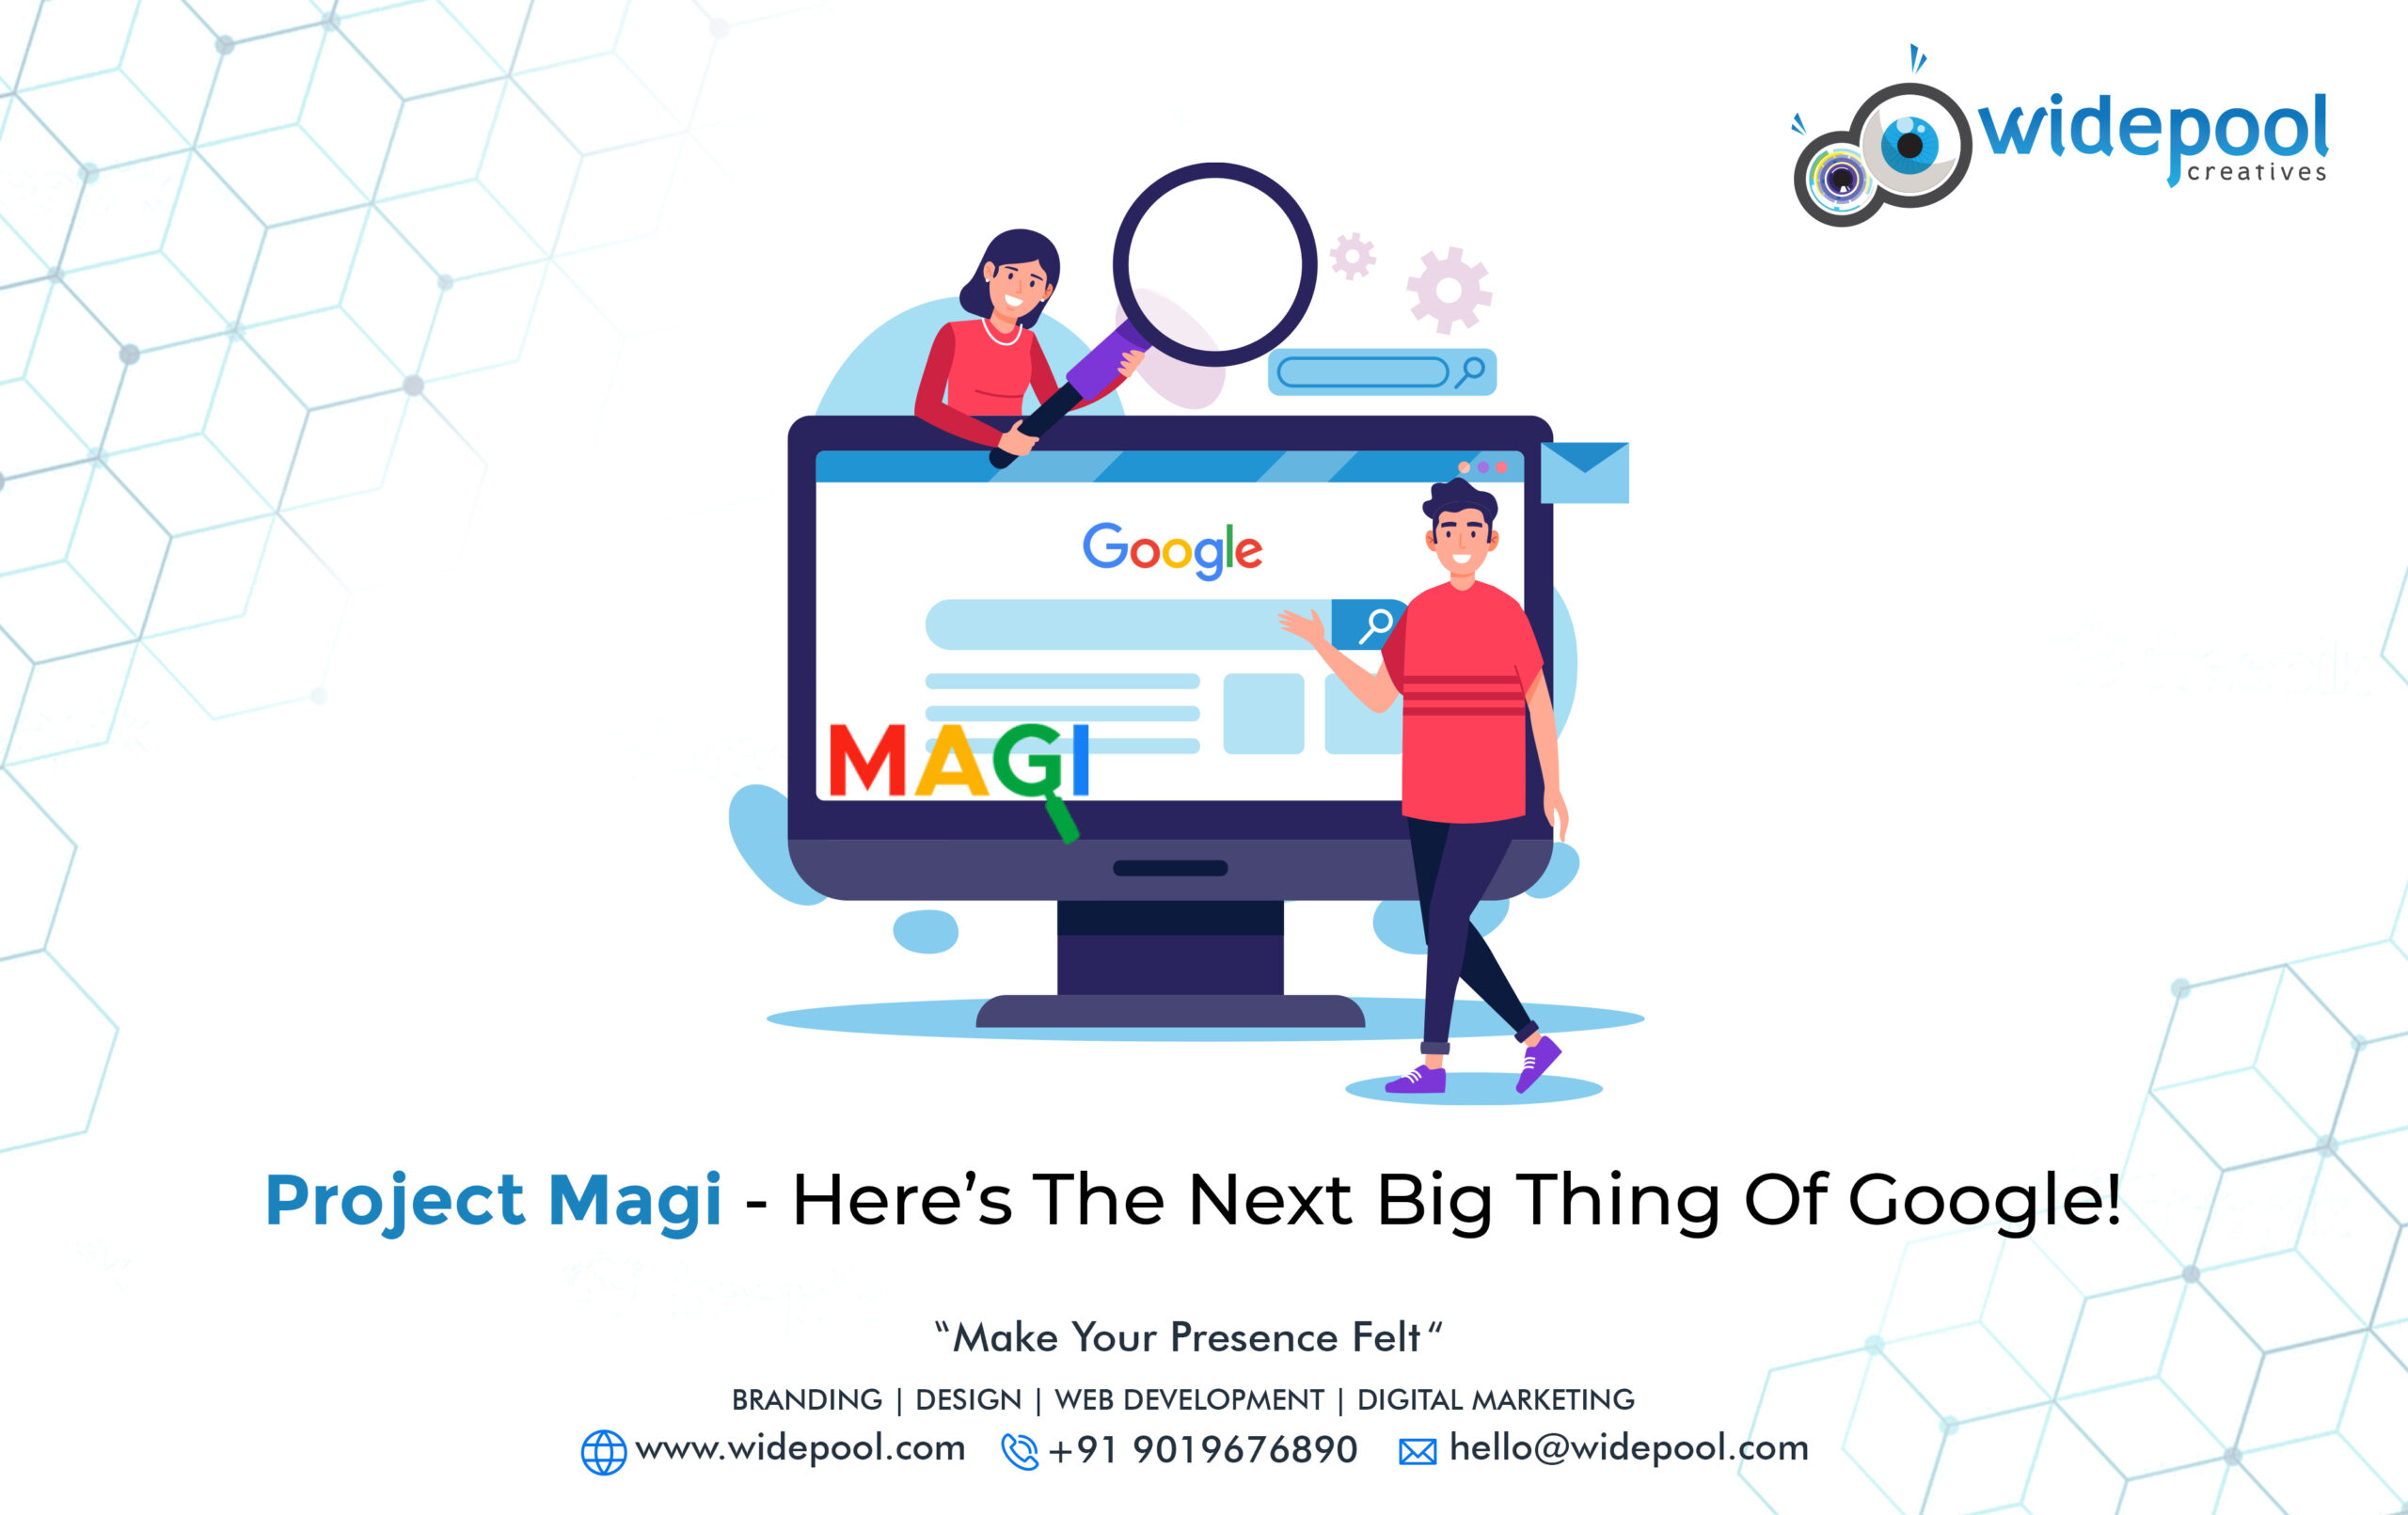 Project Magi – Here’s the Next Big Thing of Google!